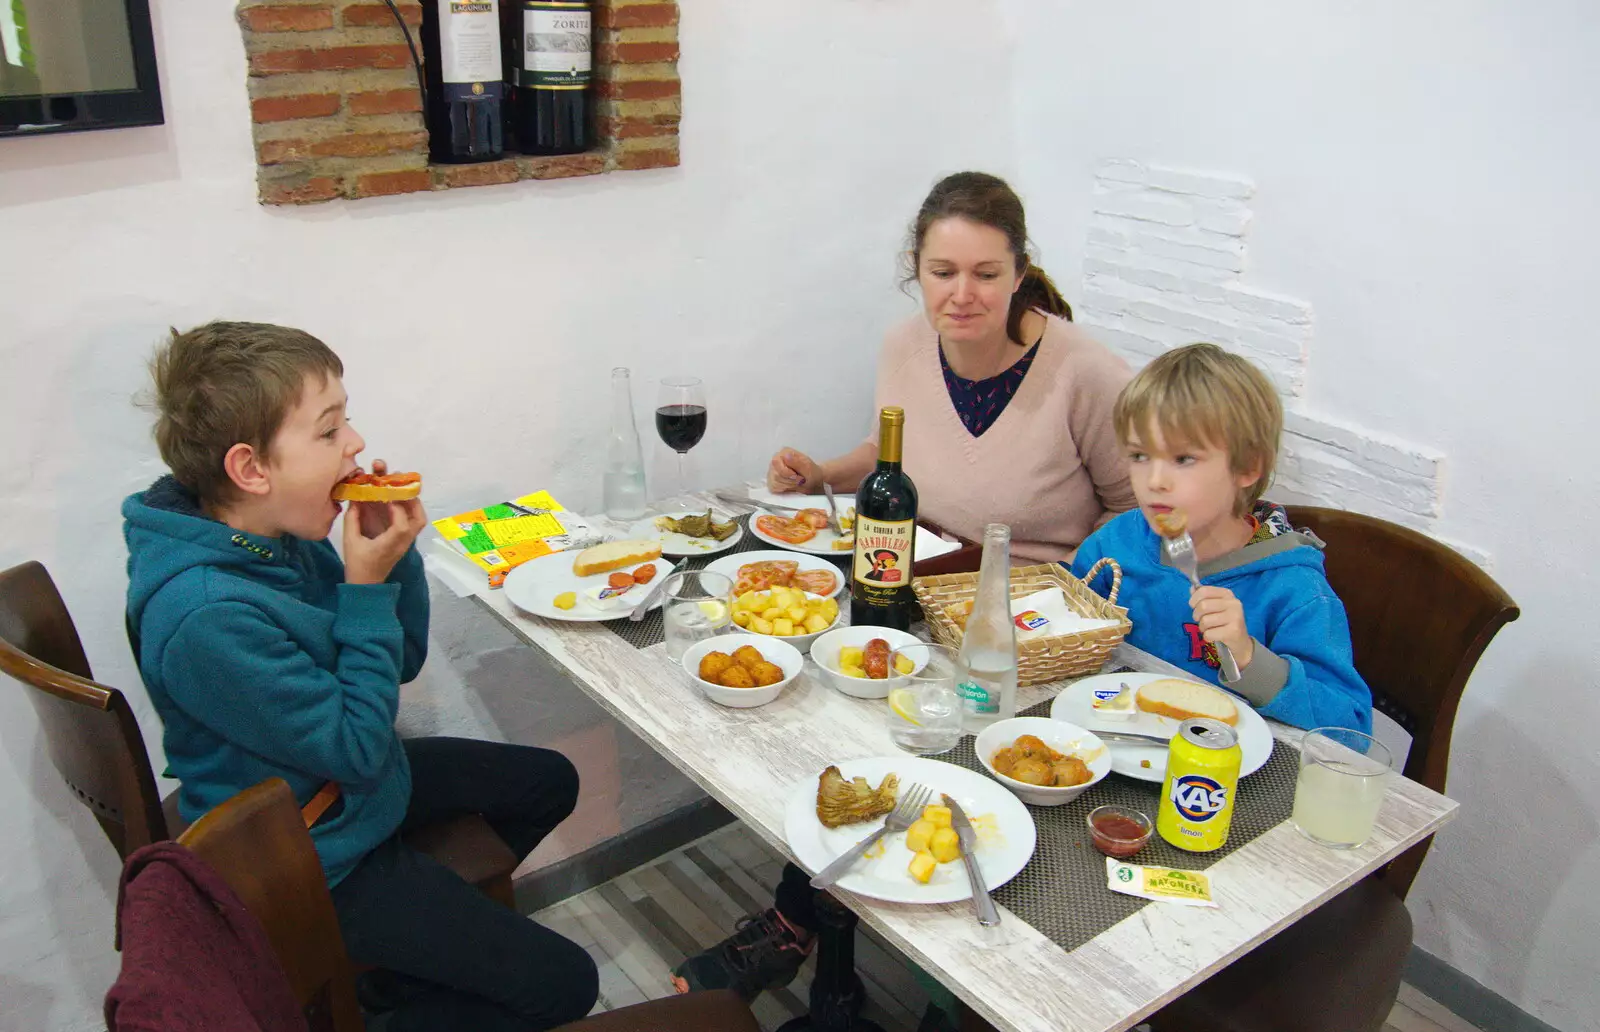 We stuff our faces with tapas, from The Caves of Nerja, and Frigiliana, Andalusia, Spain - 18th April 2019